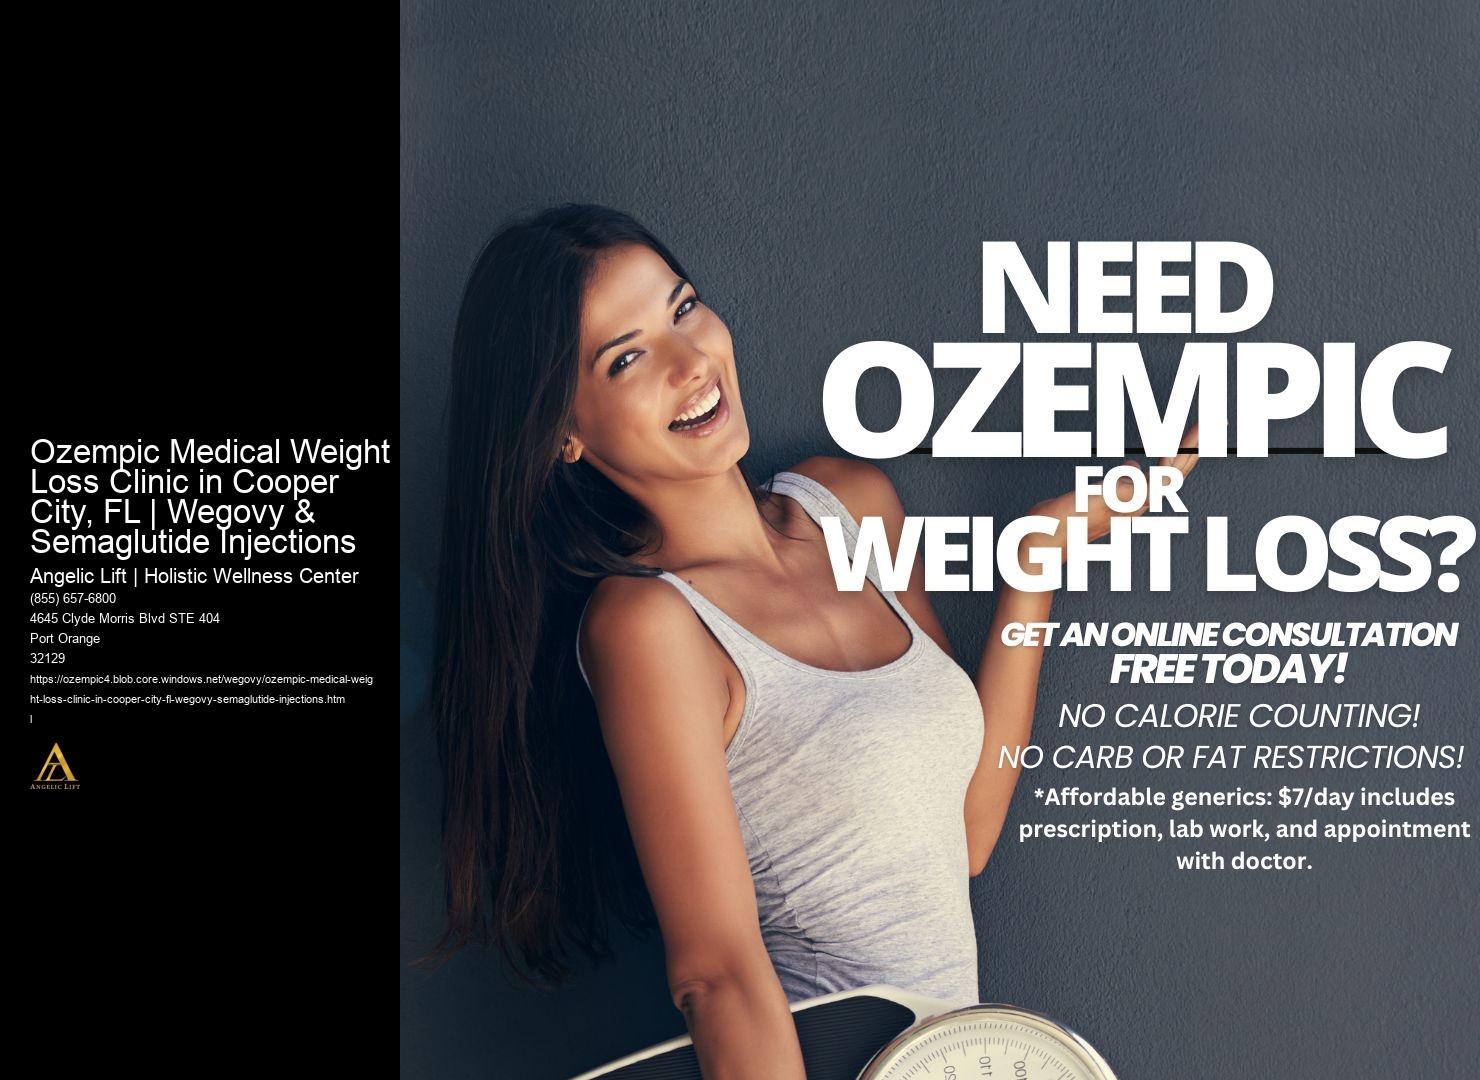 Ozempic Medical Weight Loss Clinic in Cooper City, FL | Wegovy & Semaglutide Injections